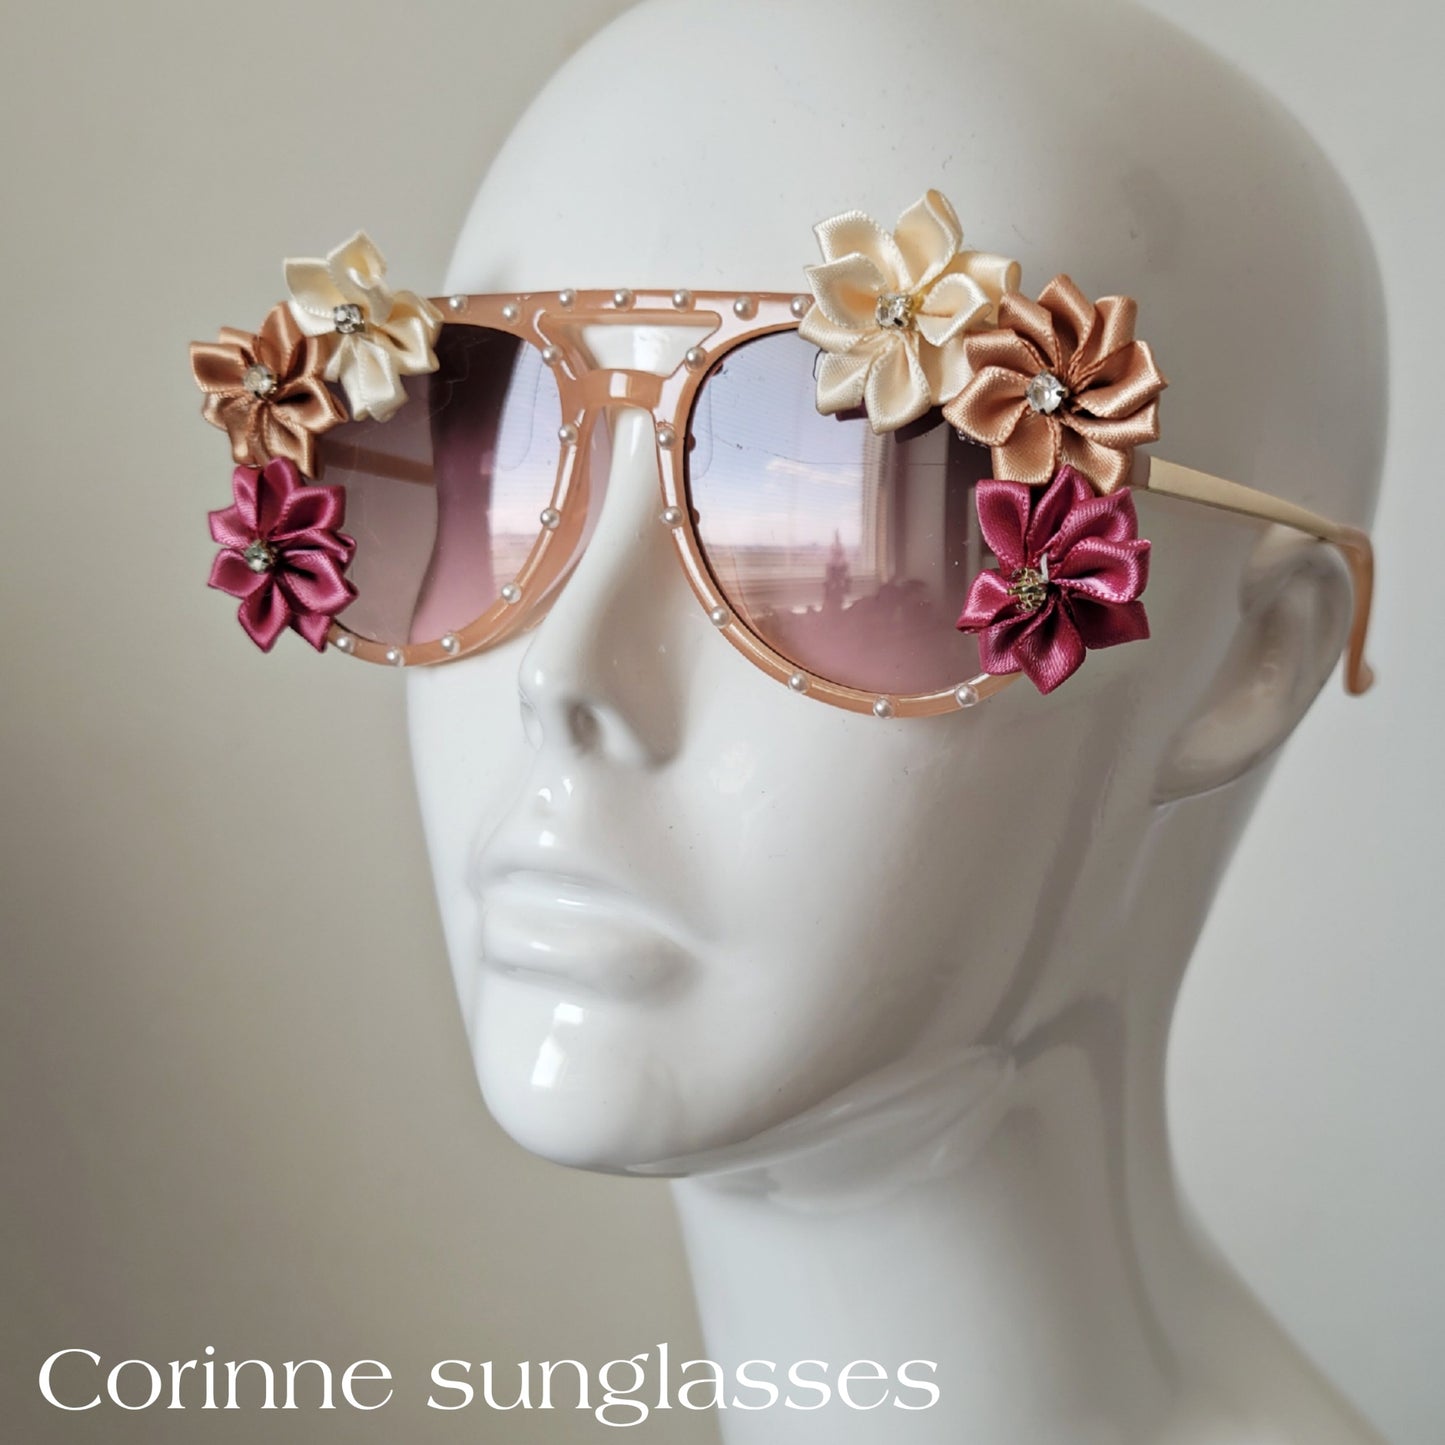 Á vallians coeurs riens impossible Collection: The Corinne sunglasses